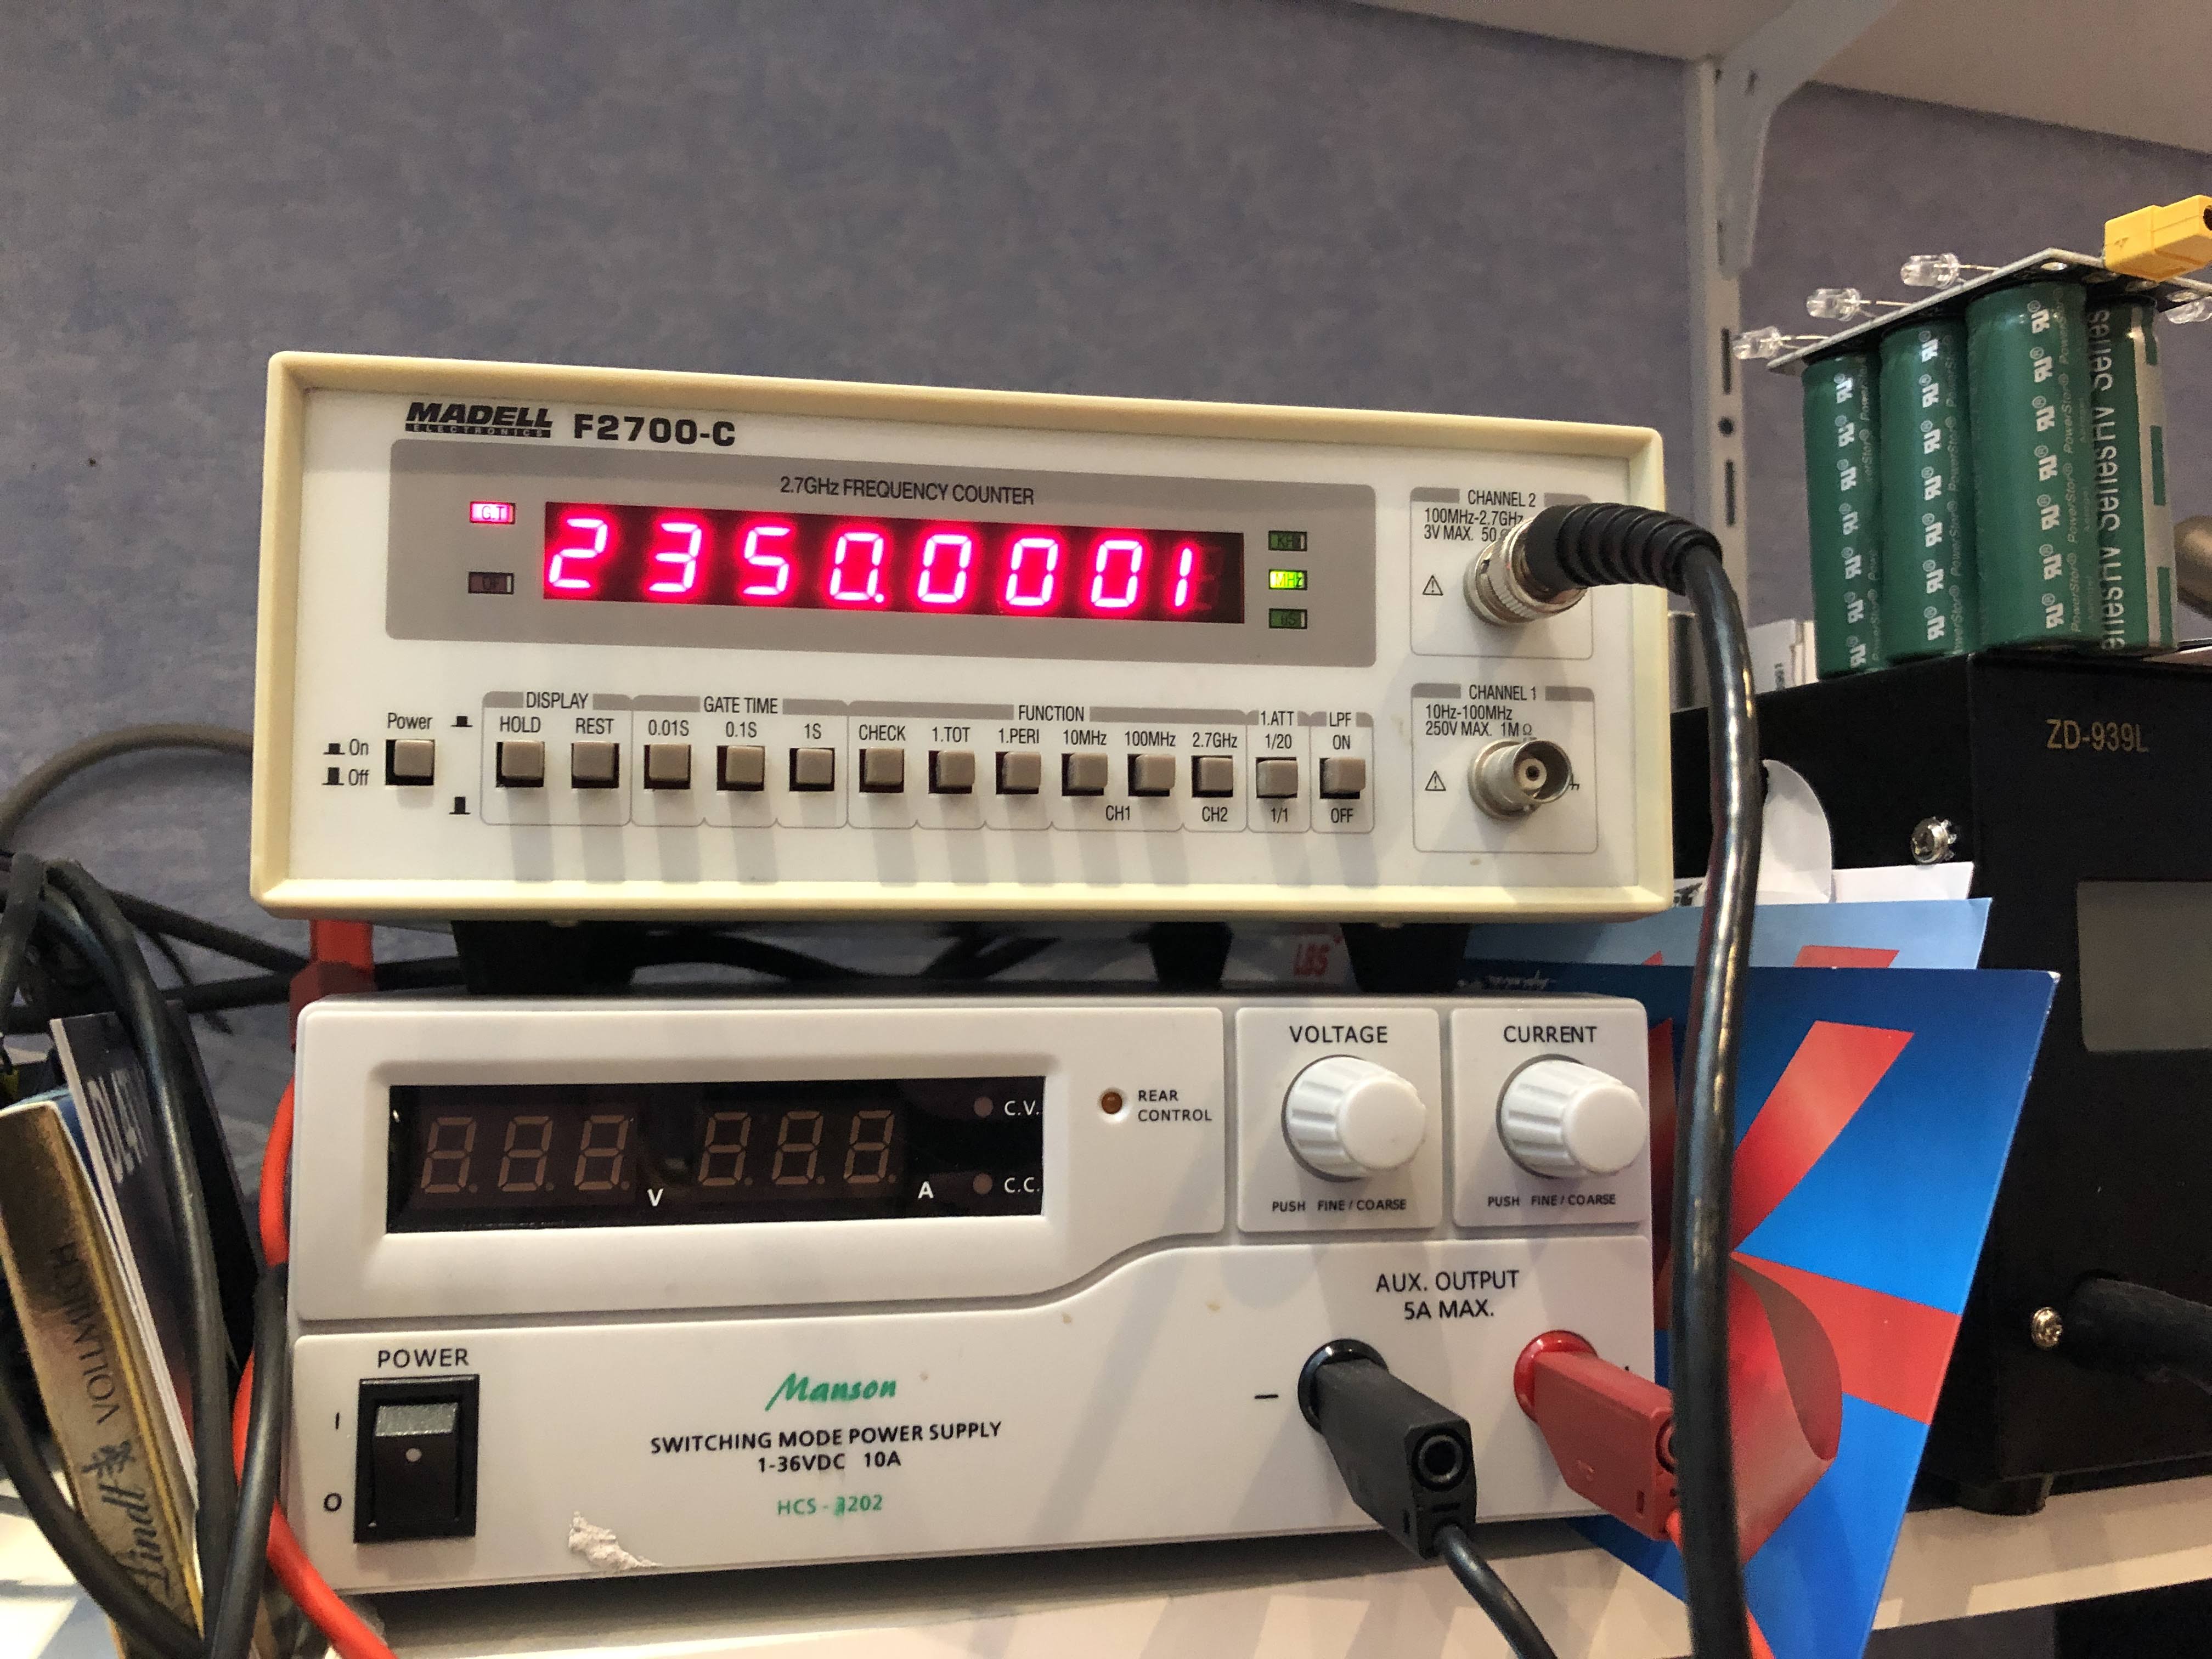 Frequency counter, showing 2350.0001 MHz